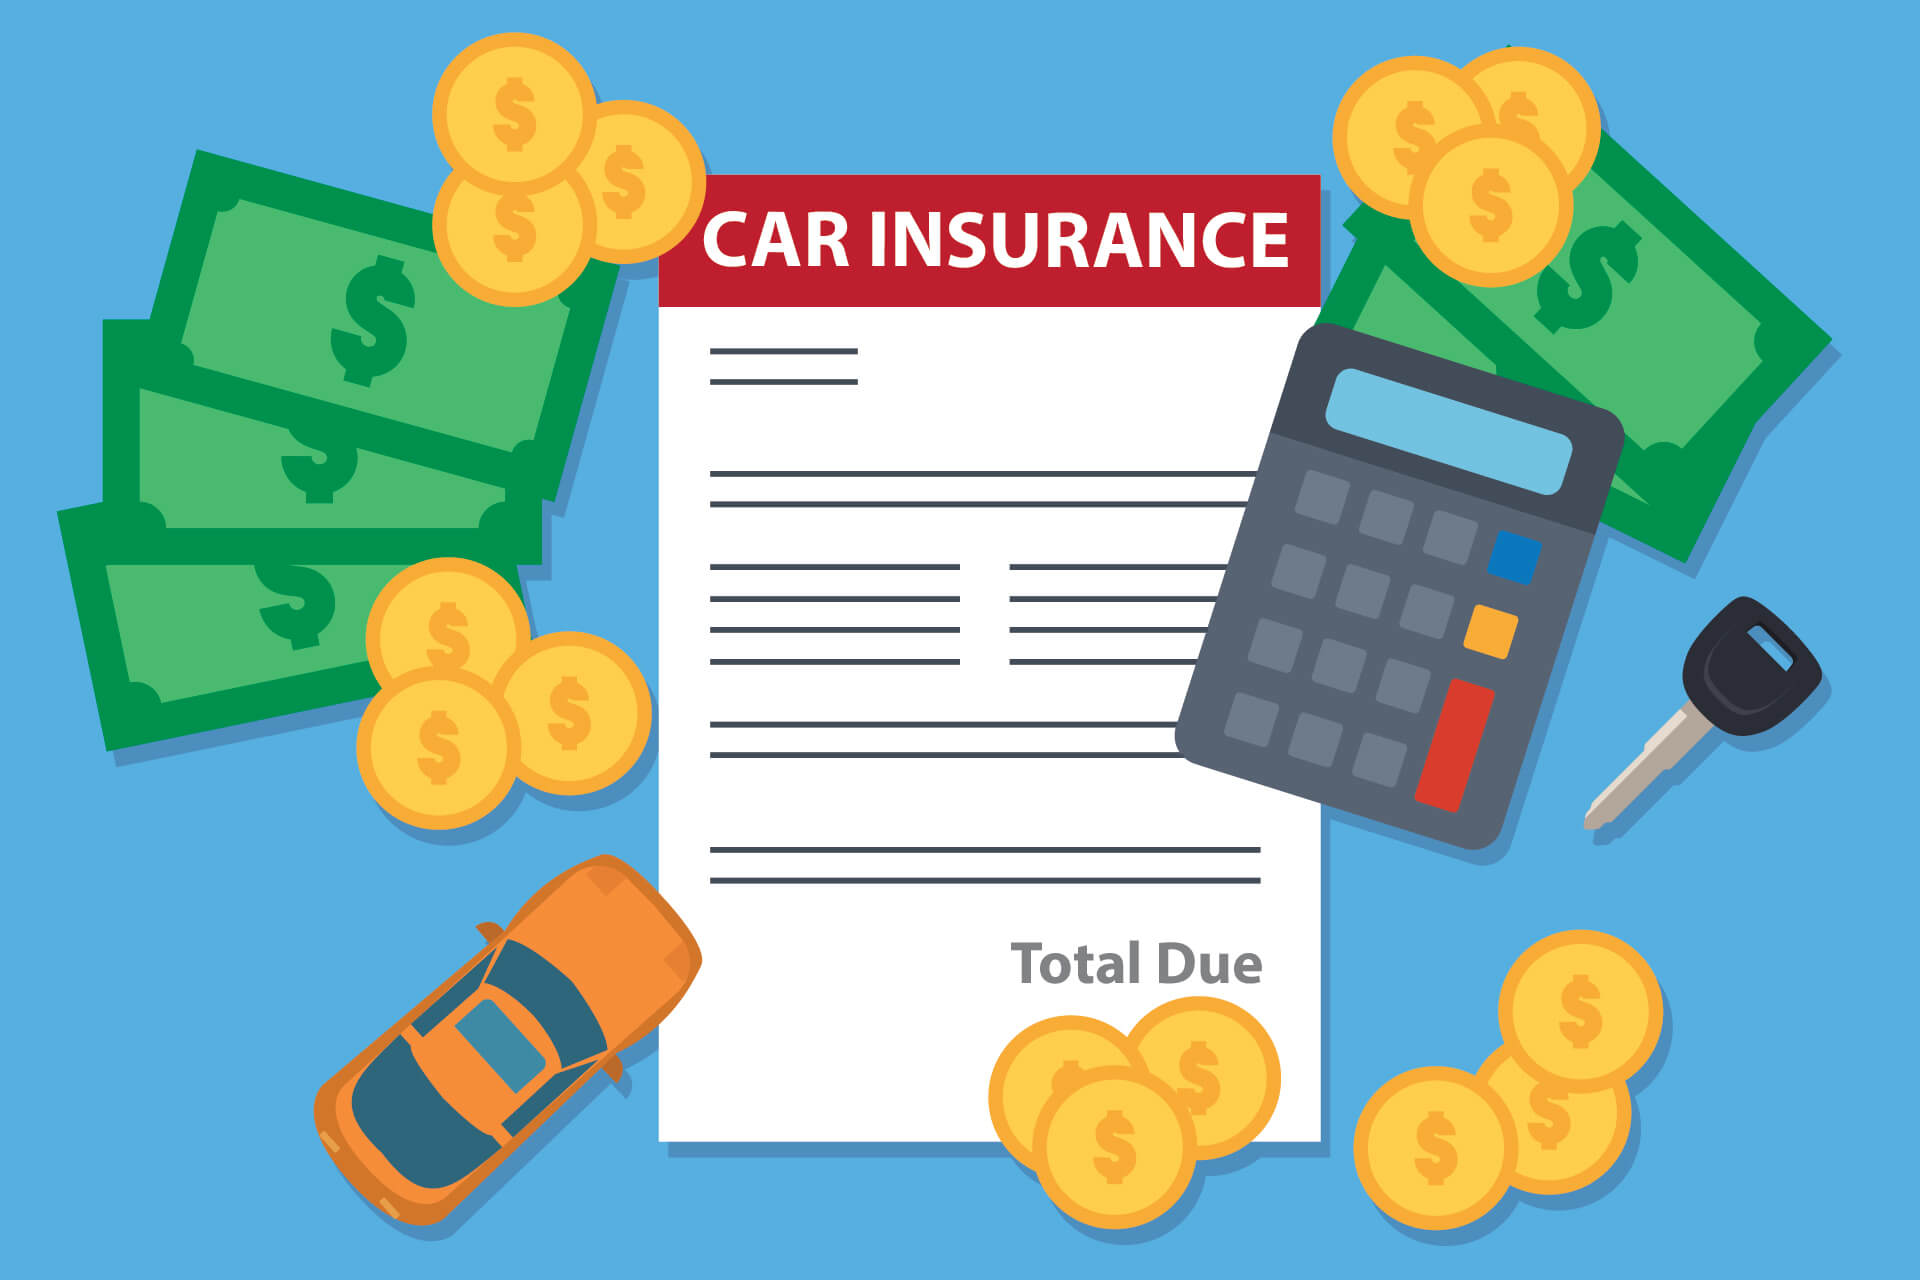 Car insurance bill concept free image download